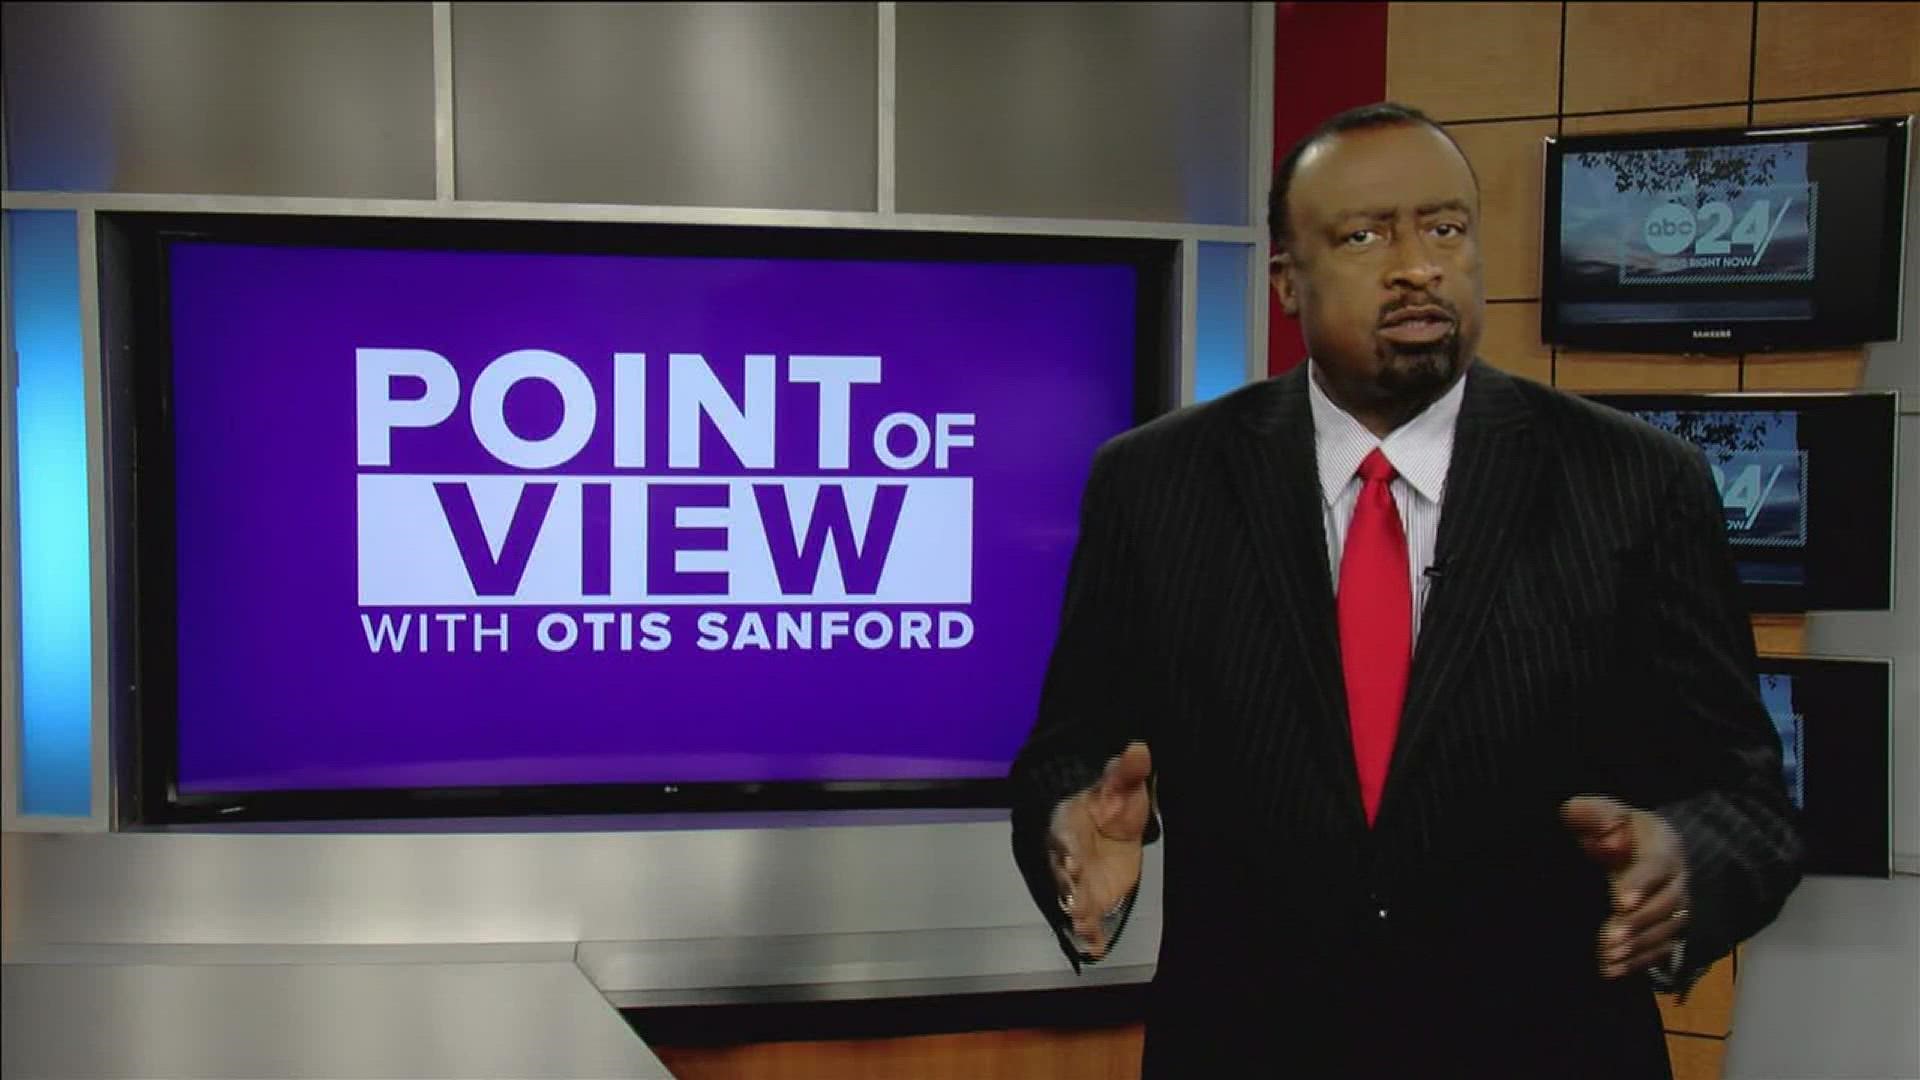 Political analyst and commentator Otis Sanford shared his point of view on the redlining lawsuit involving Trustmark National Bank.